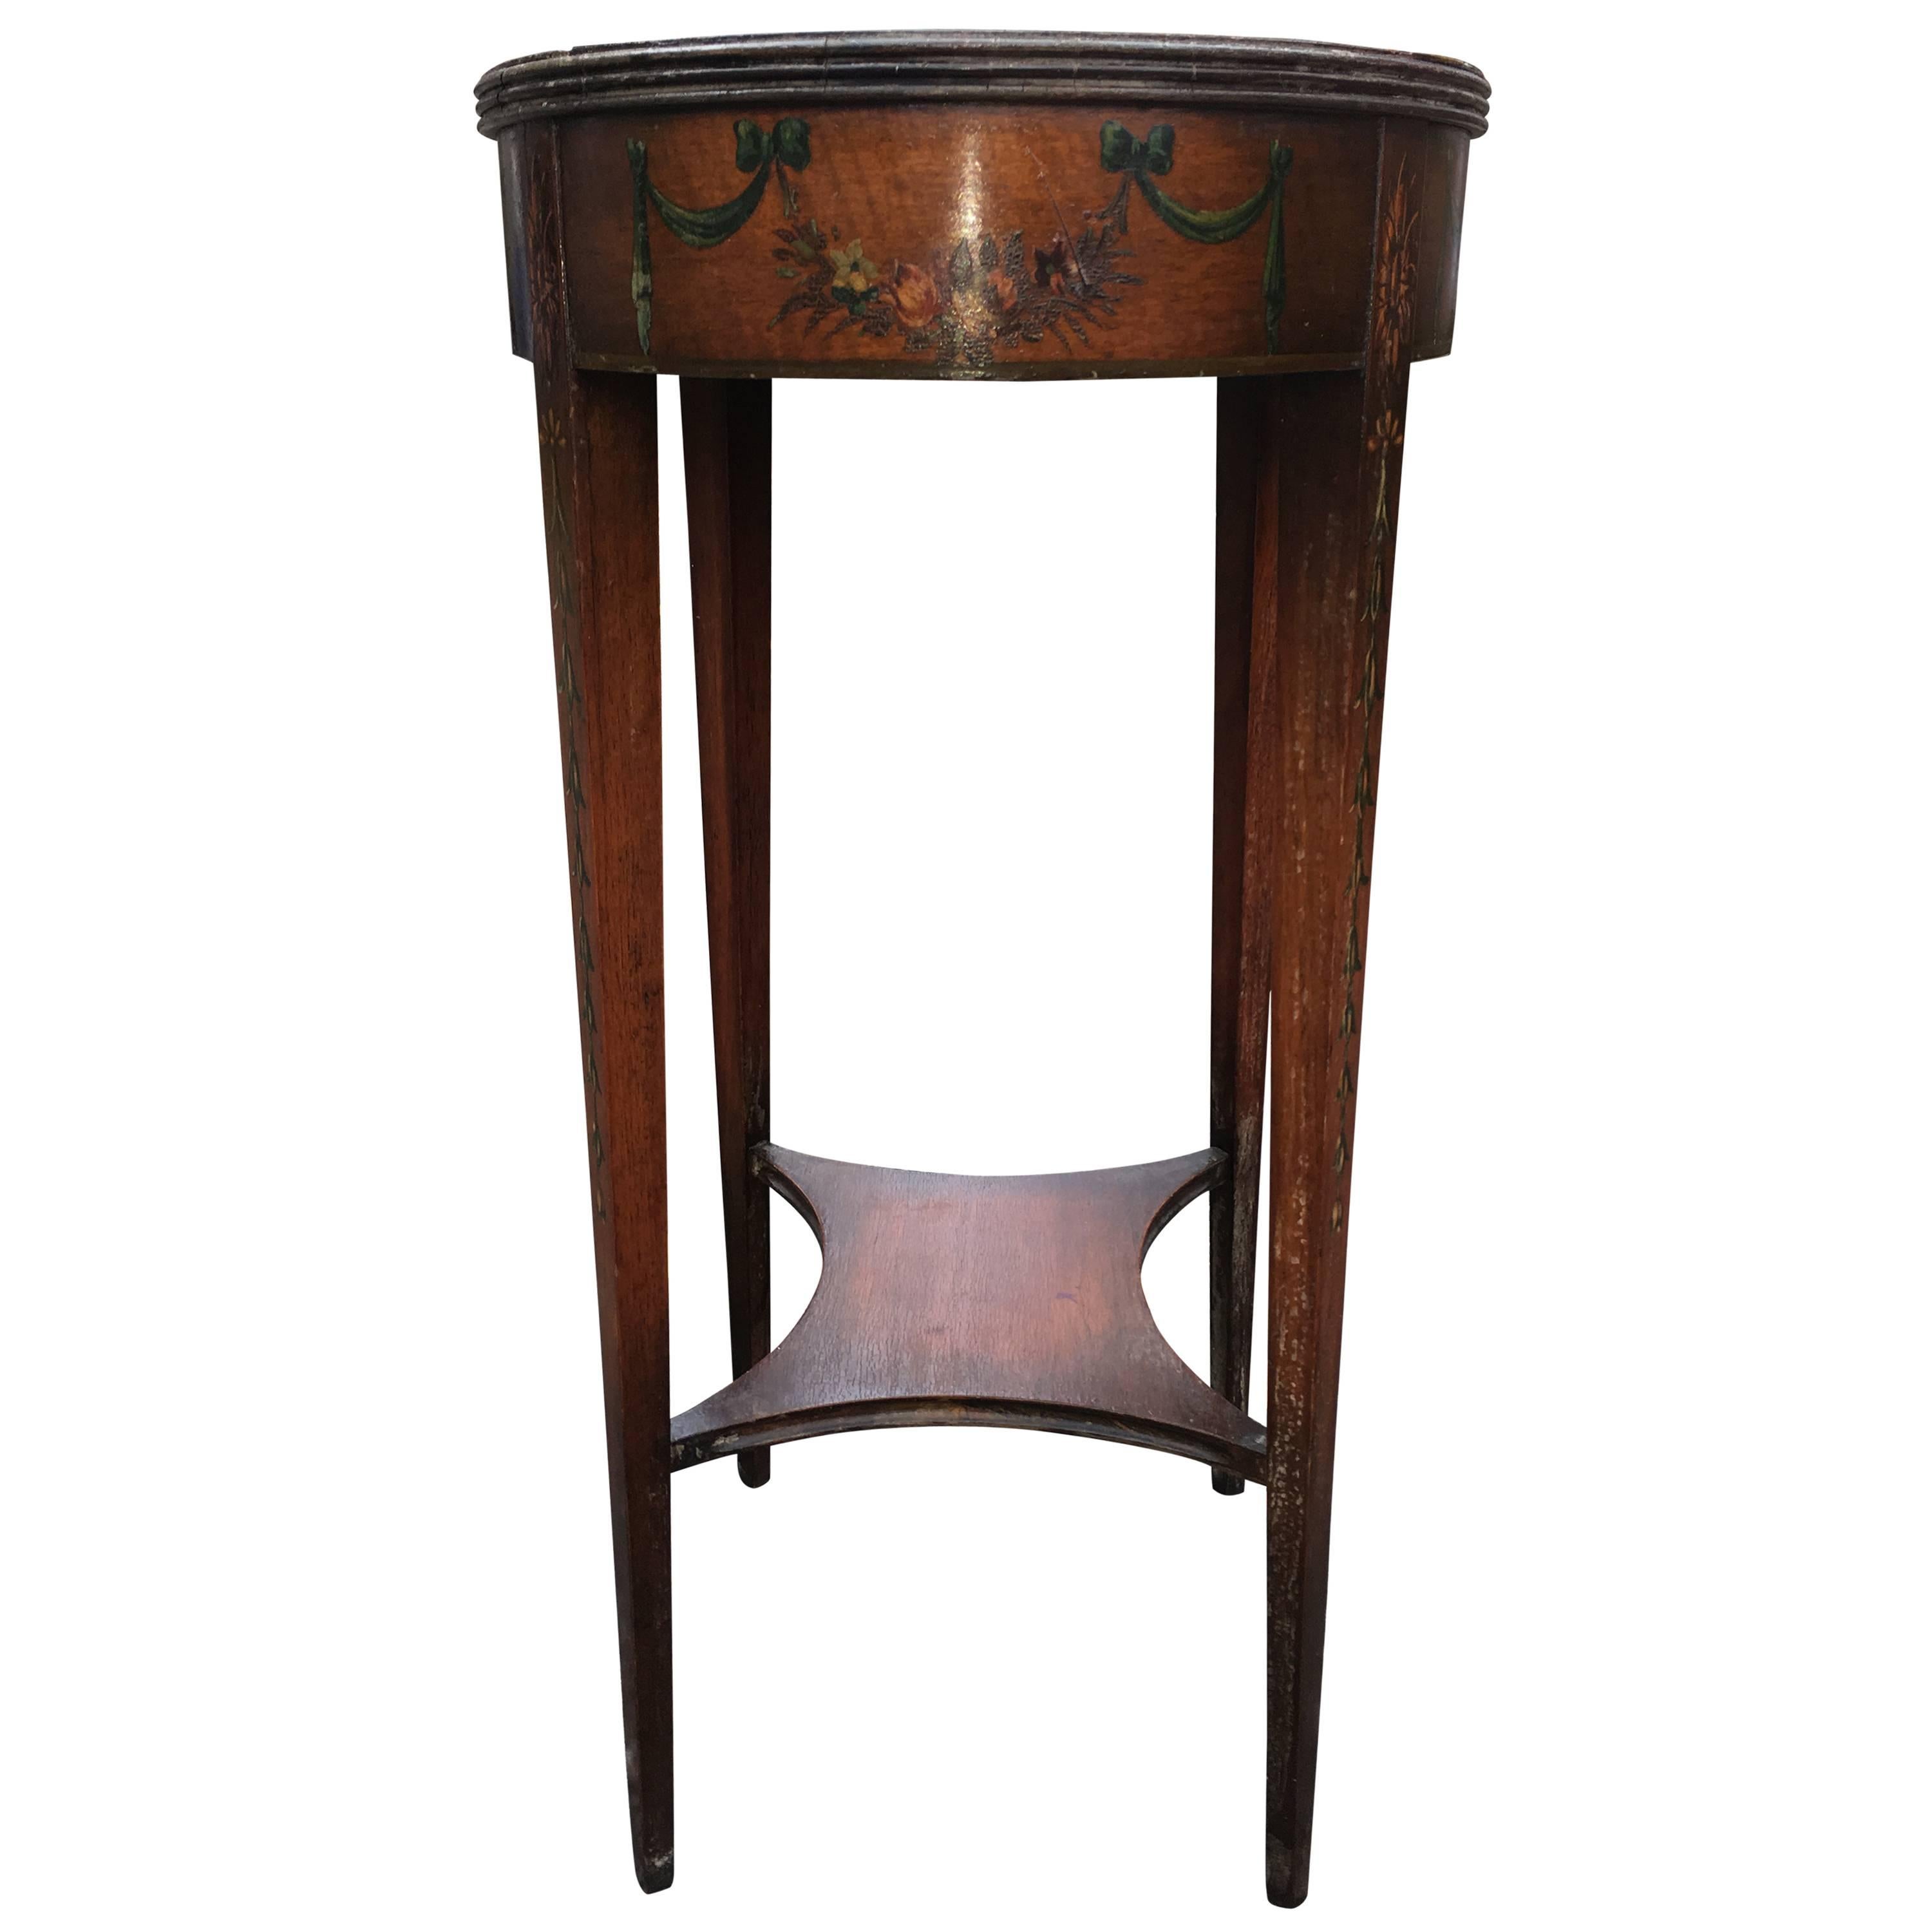 Charming Oval Tall Hand-Painted Mahogany Side Table